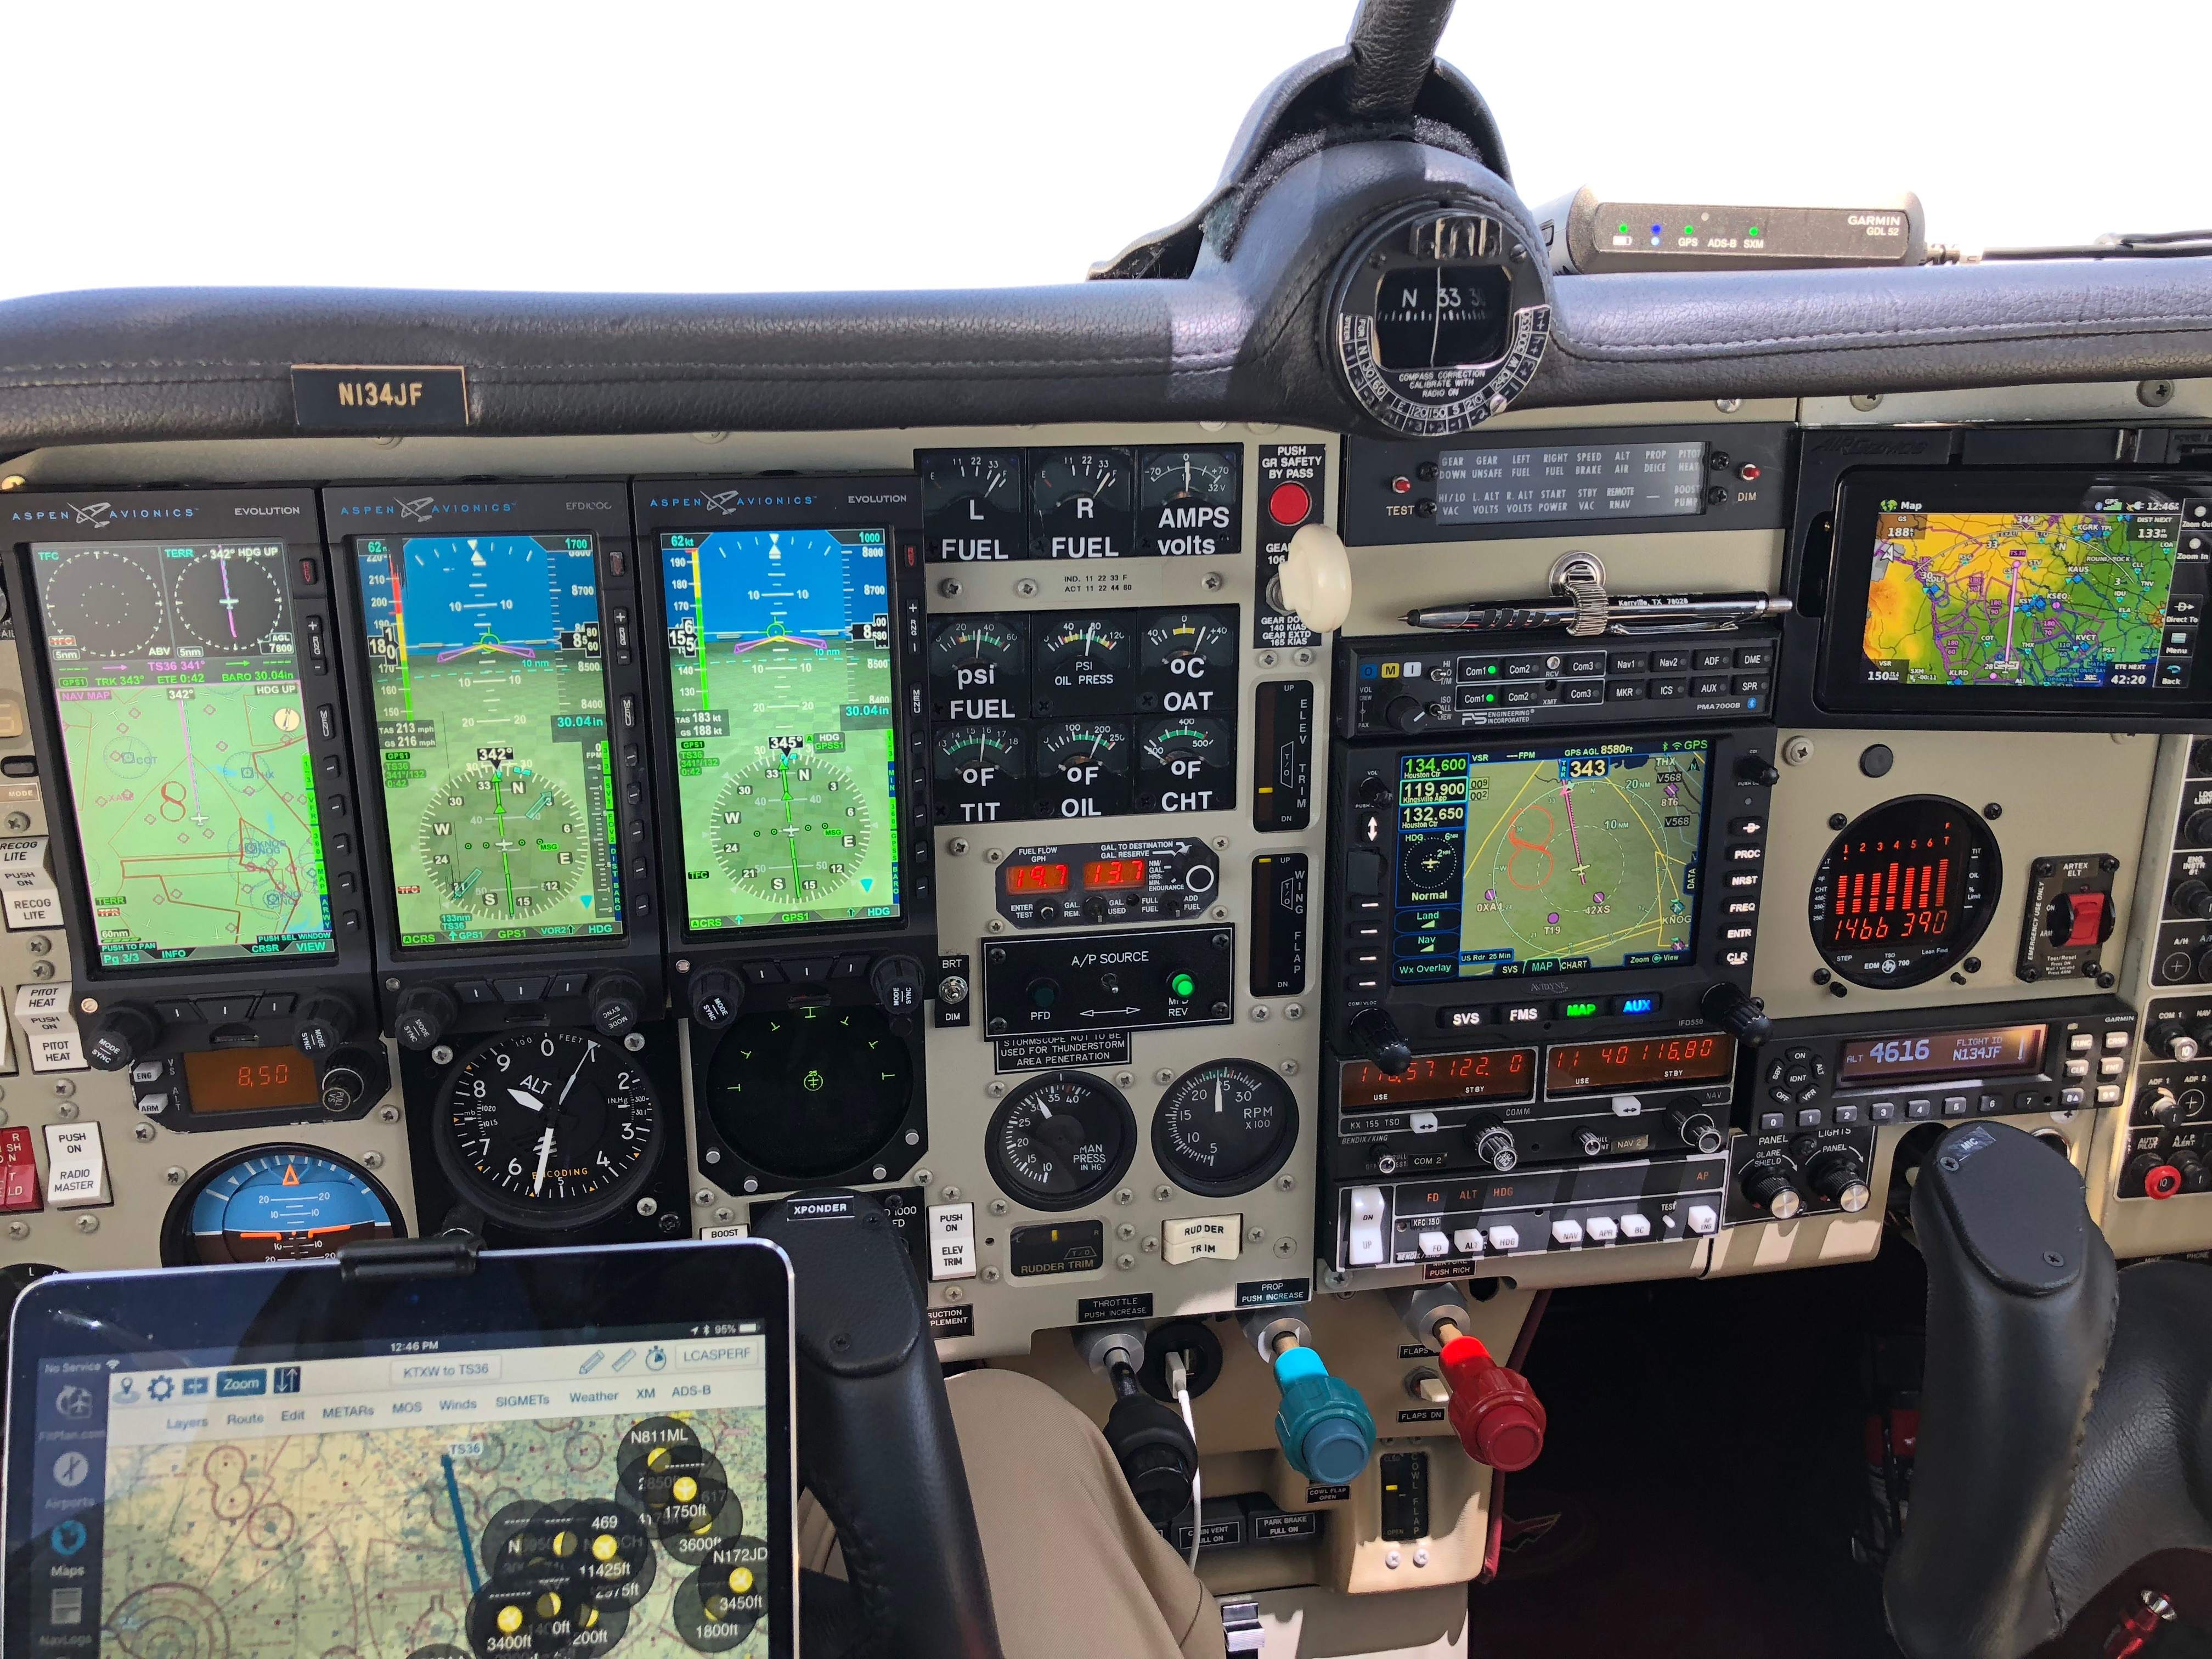 Anybody hard wire Aera 660 with Gizmo? - Avionics/Panel Discussion - - A community for Mooney aircraft owners and enthusiasts